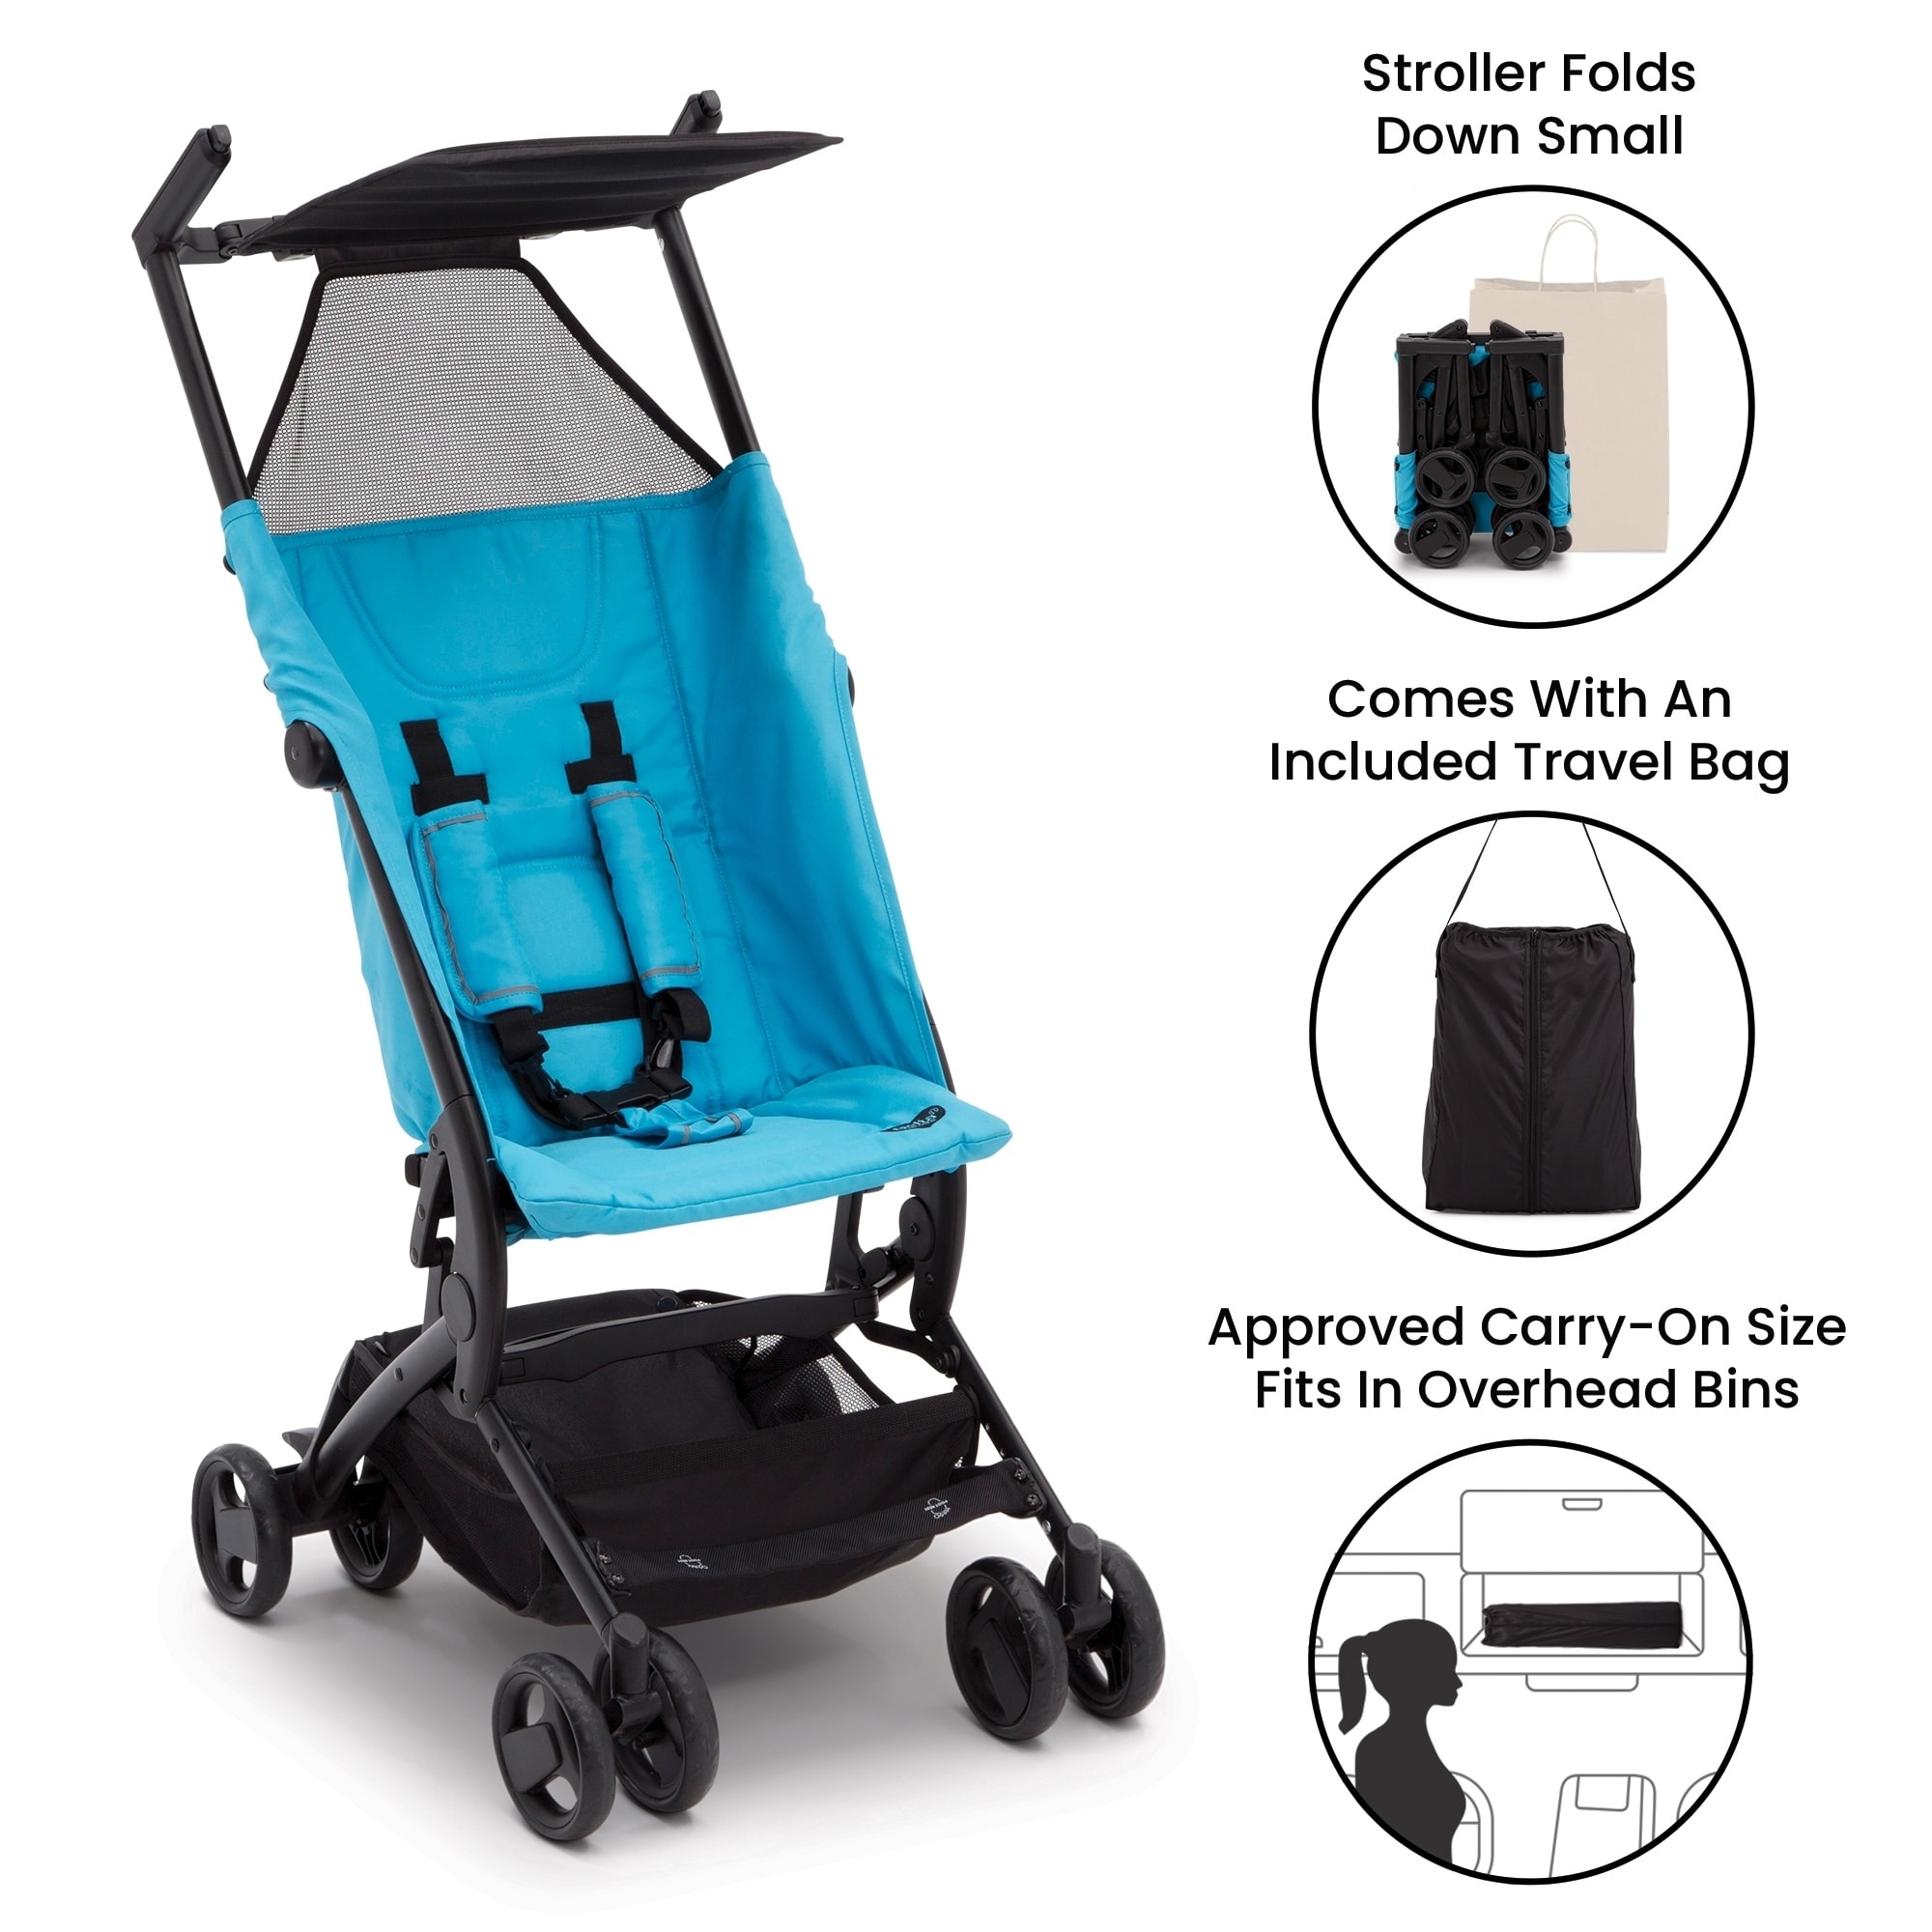 strollers that fold down small